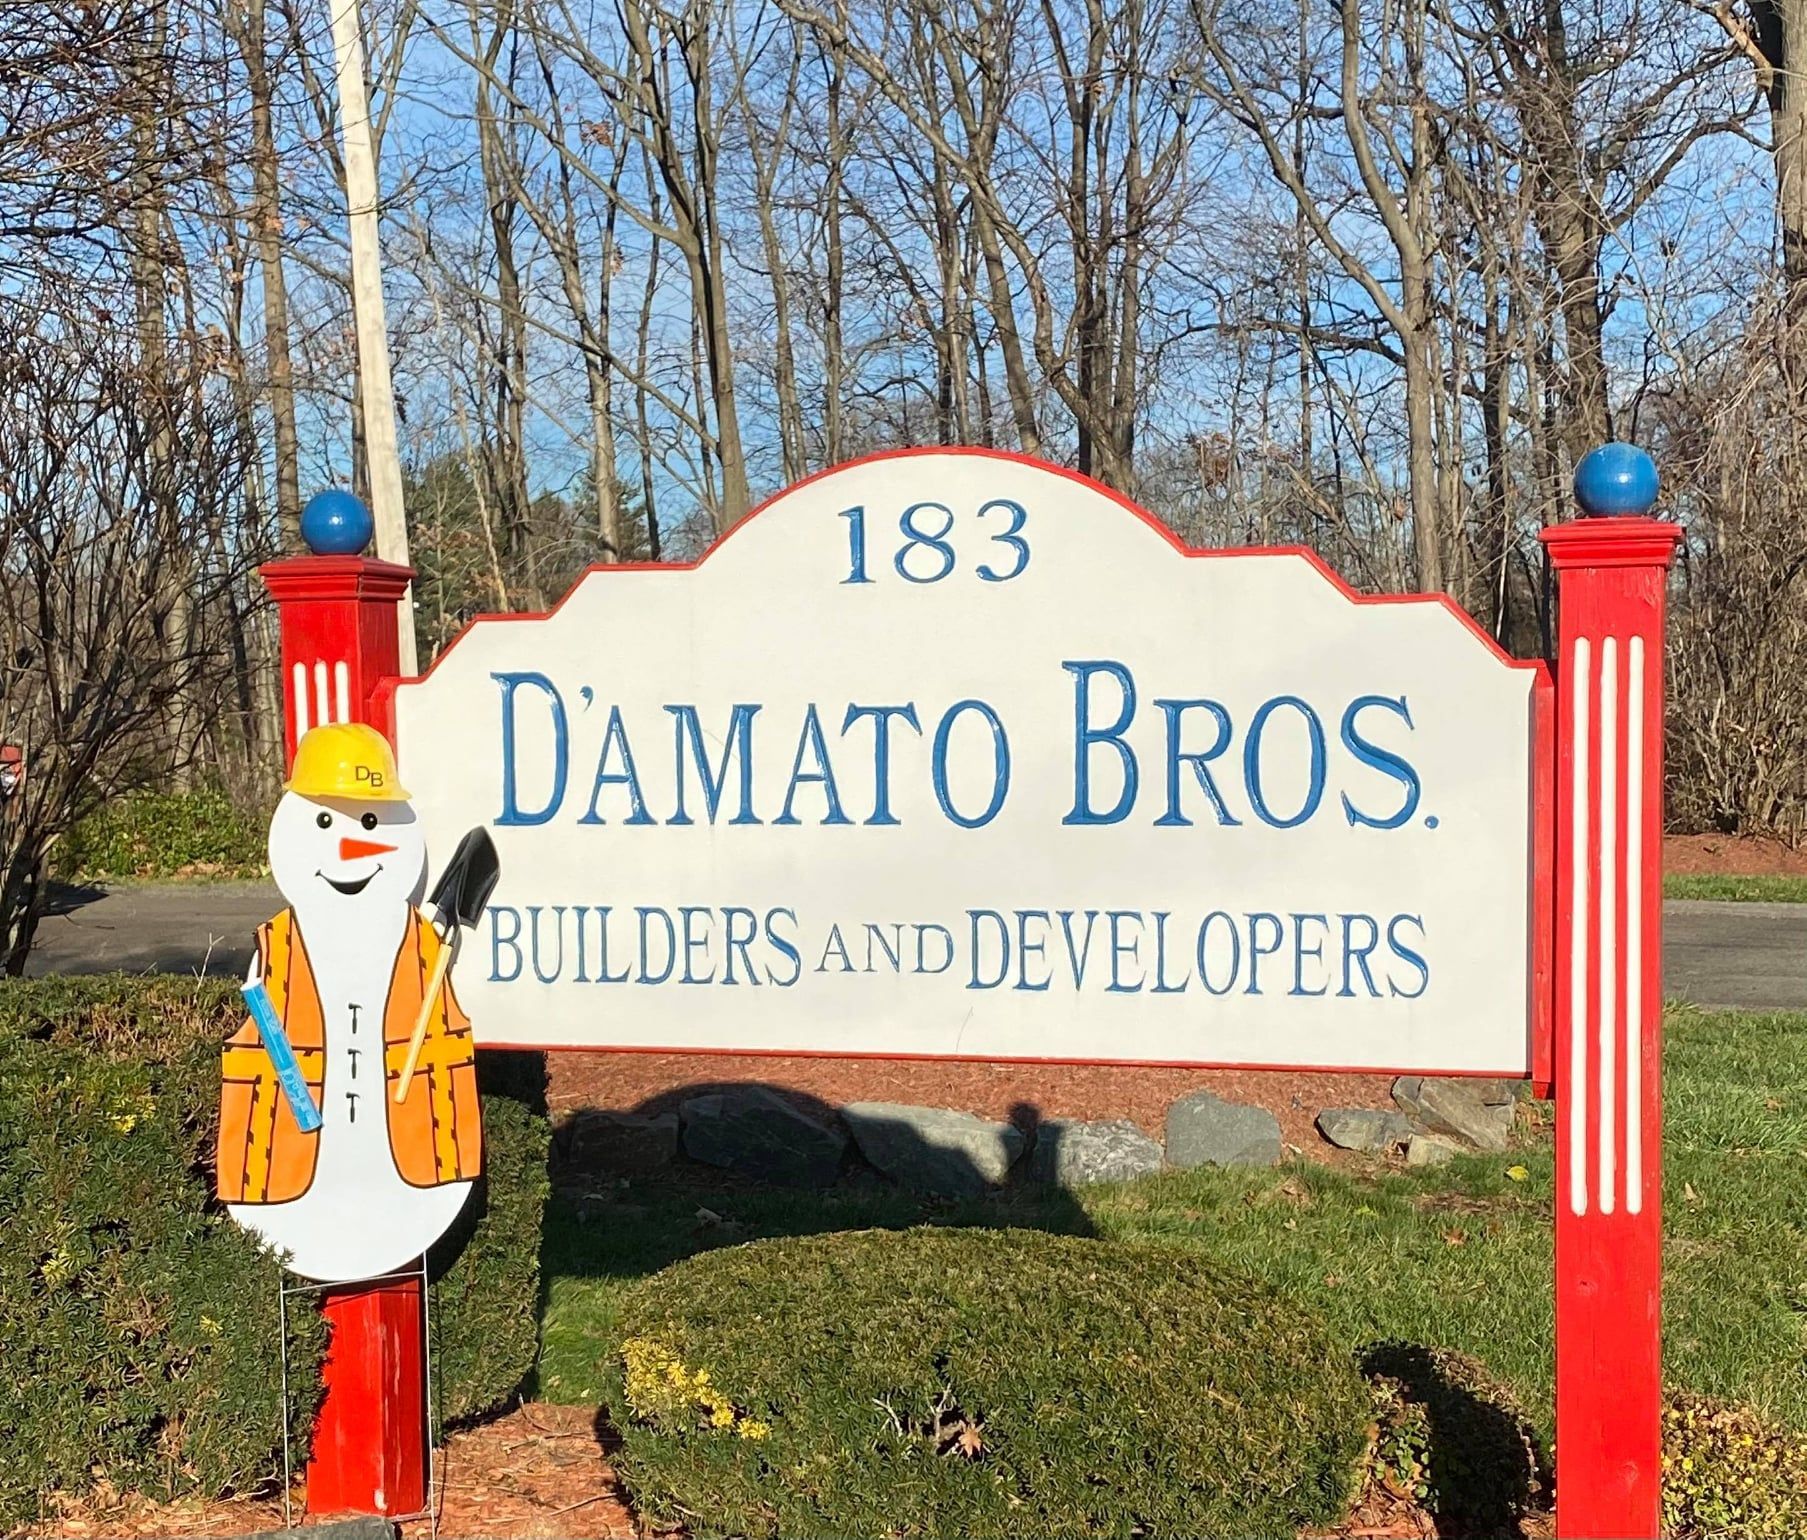 a sign for damato bros builders and developers